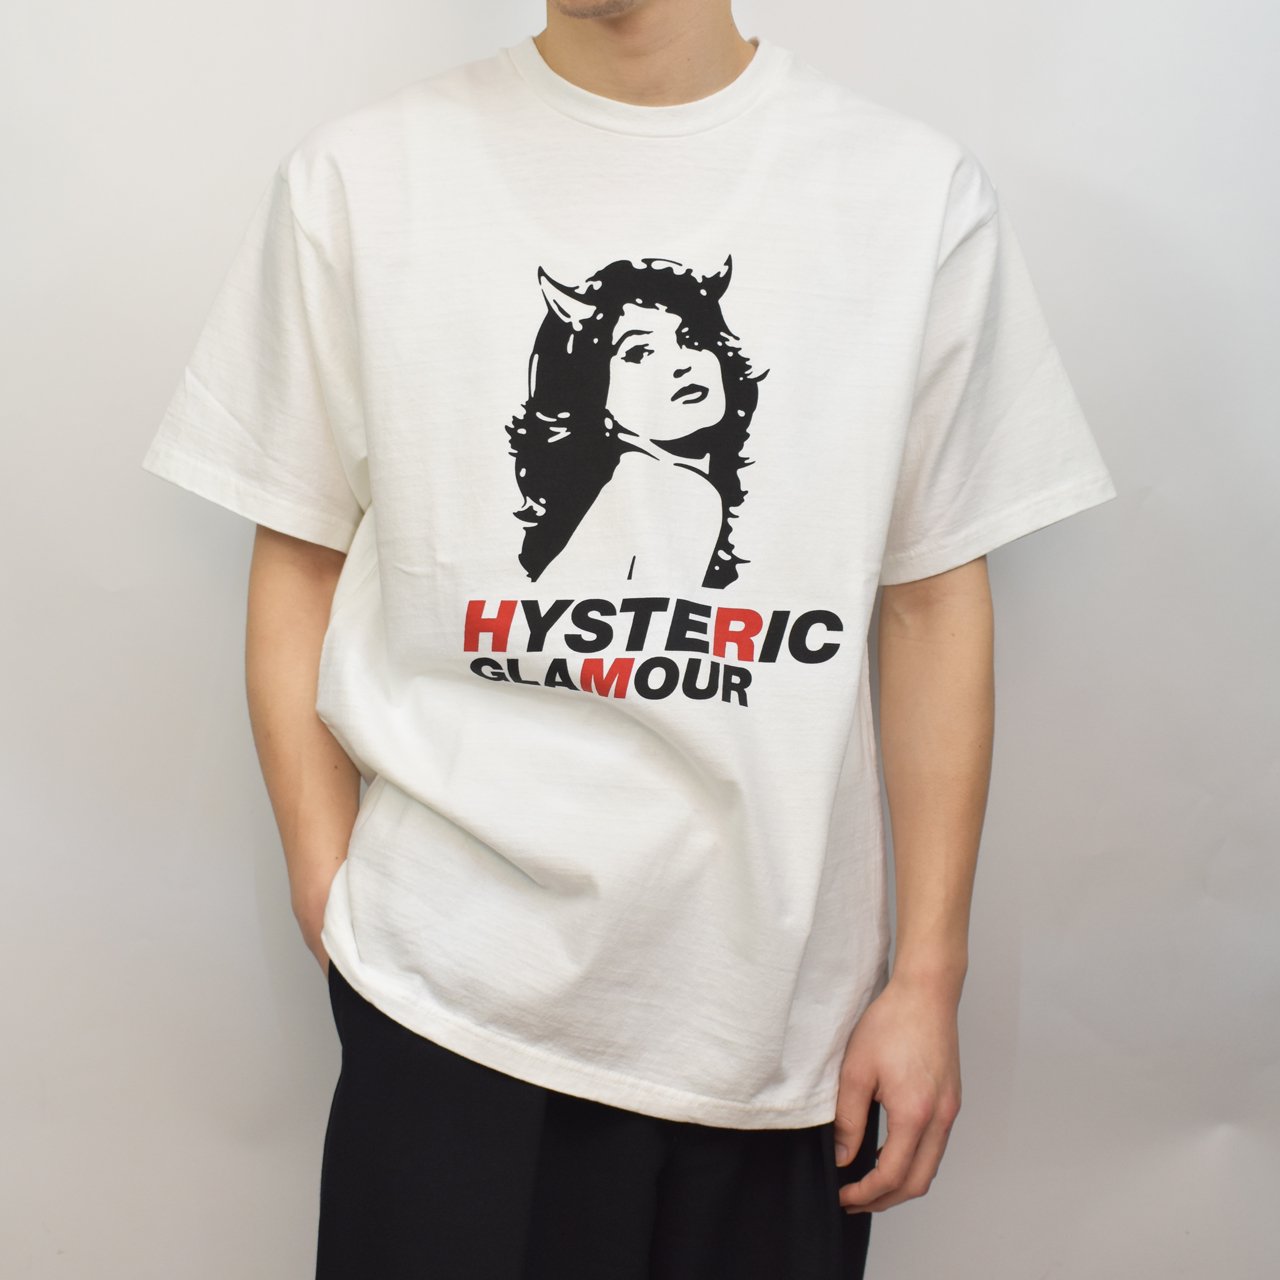 <img class='new_mark_img1' src='https://img.shop-pro.jp/img/new/icons5.gif' style='border:none;display:inline;margin:0px;padding:0px;width:auto;' />HYSTERIC GLAMOUR (ヒステリックグラマー)｜2TONE DEVIL WOMAN Tシャツ ホワイト